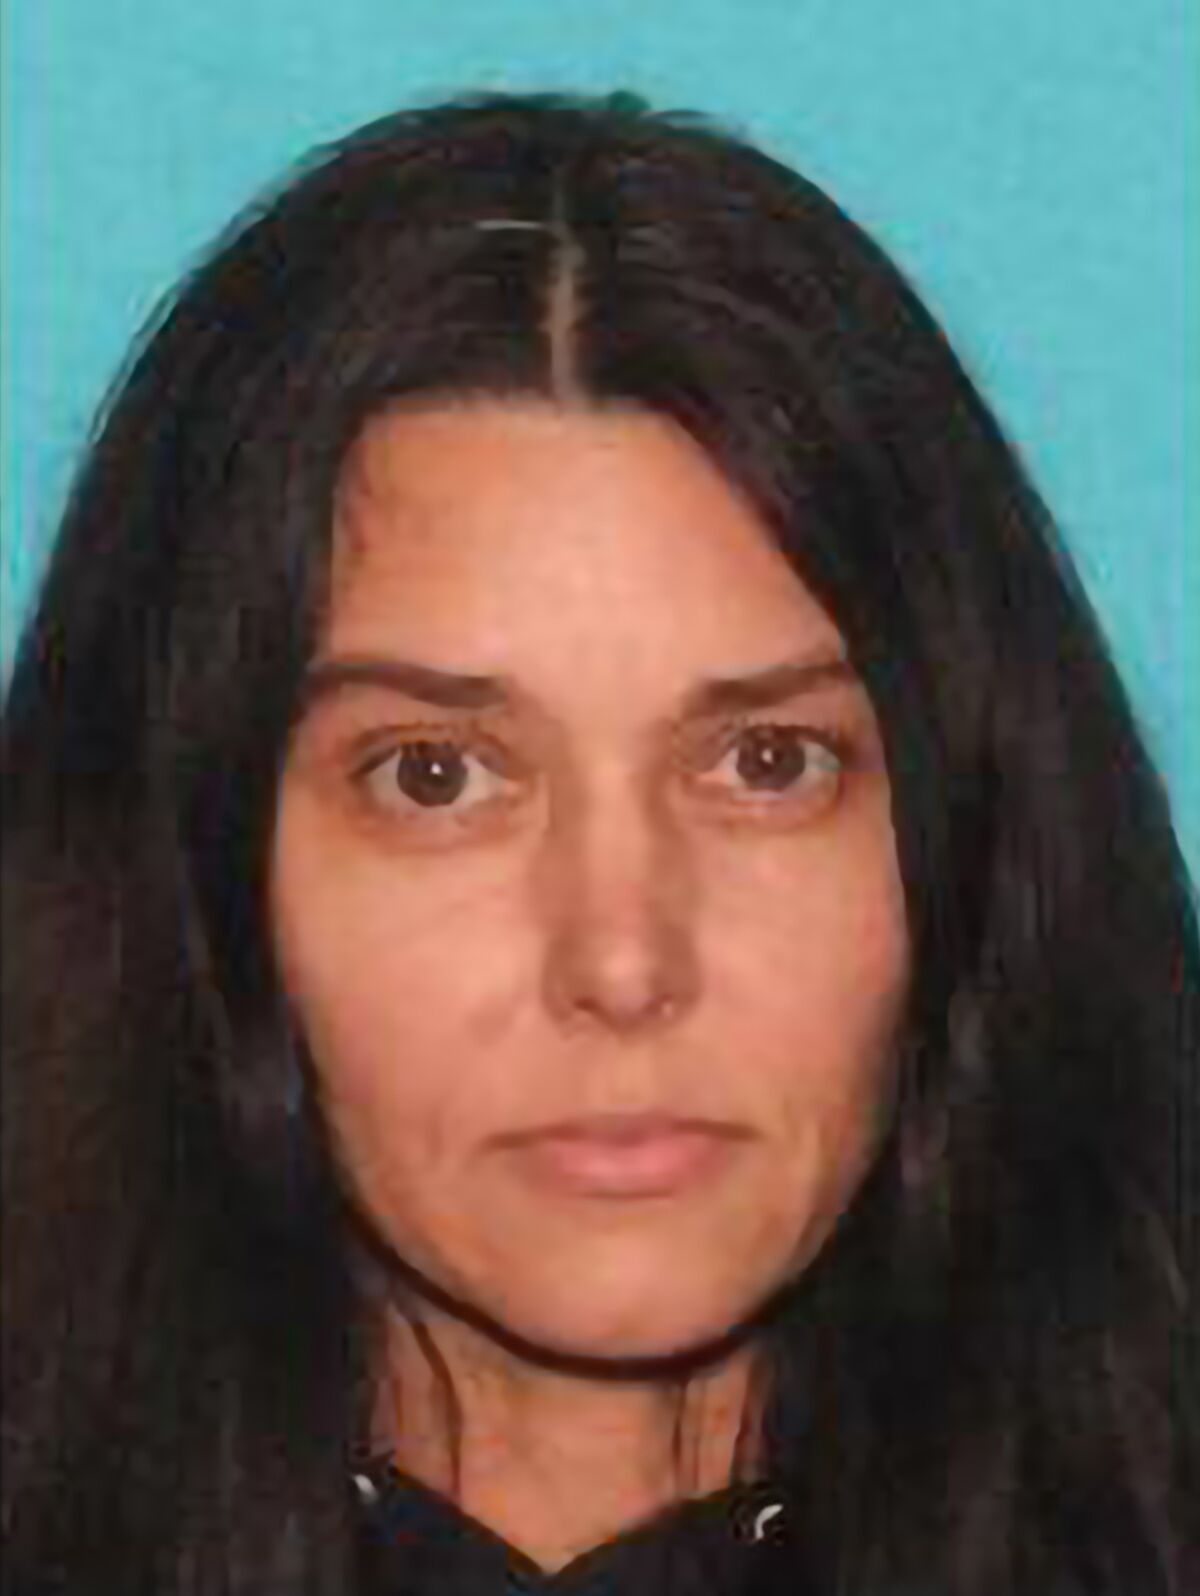 This photo provided by the Santa Ana Police Department shows Jade Benning who has been arrested in Texas for the 1996 stabbing death of her boyfriend in Southern California. Benning was taken into custody Tuesday near her home in Austin, Texas, according to police in Santa Ana, California. It wasn't immediately known if the 48-year-old has an attorney. (Santa Ana Police Department via AP)